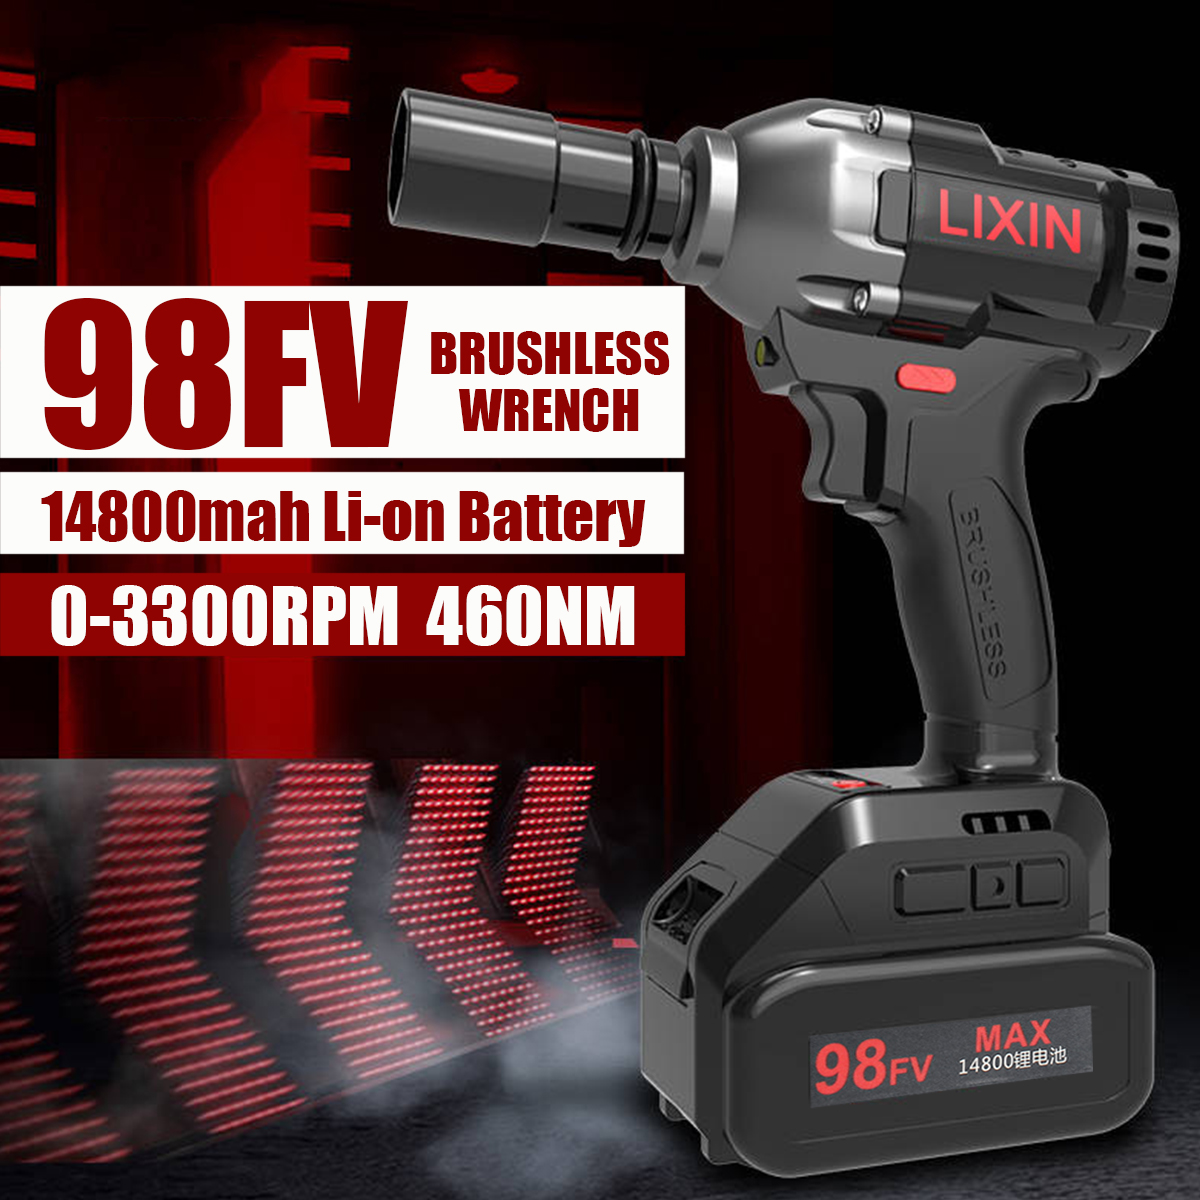 98FV 14800mAh Cordless Brushless Electric Wrench Drill LED Light W/ 1 or 2 Li-on Battery 11